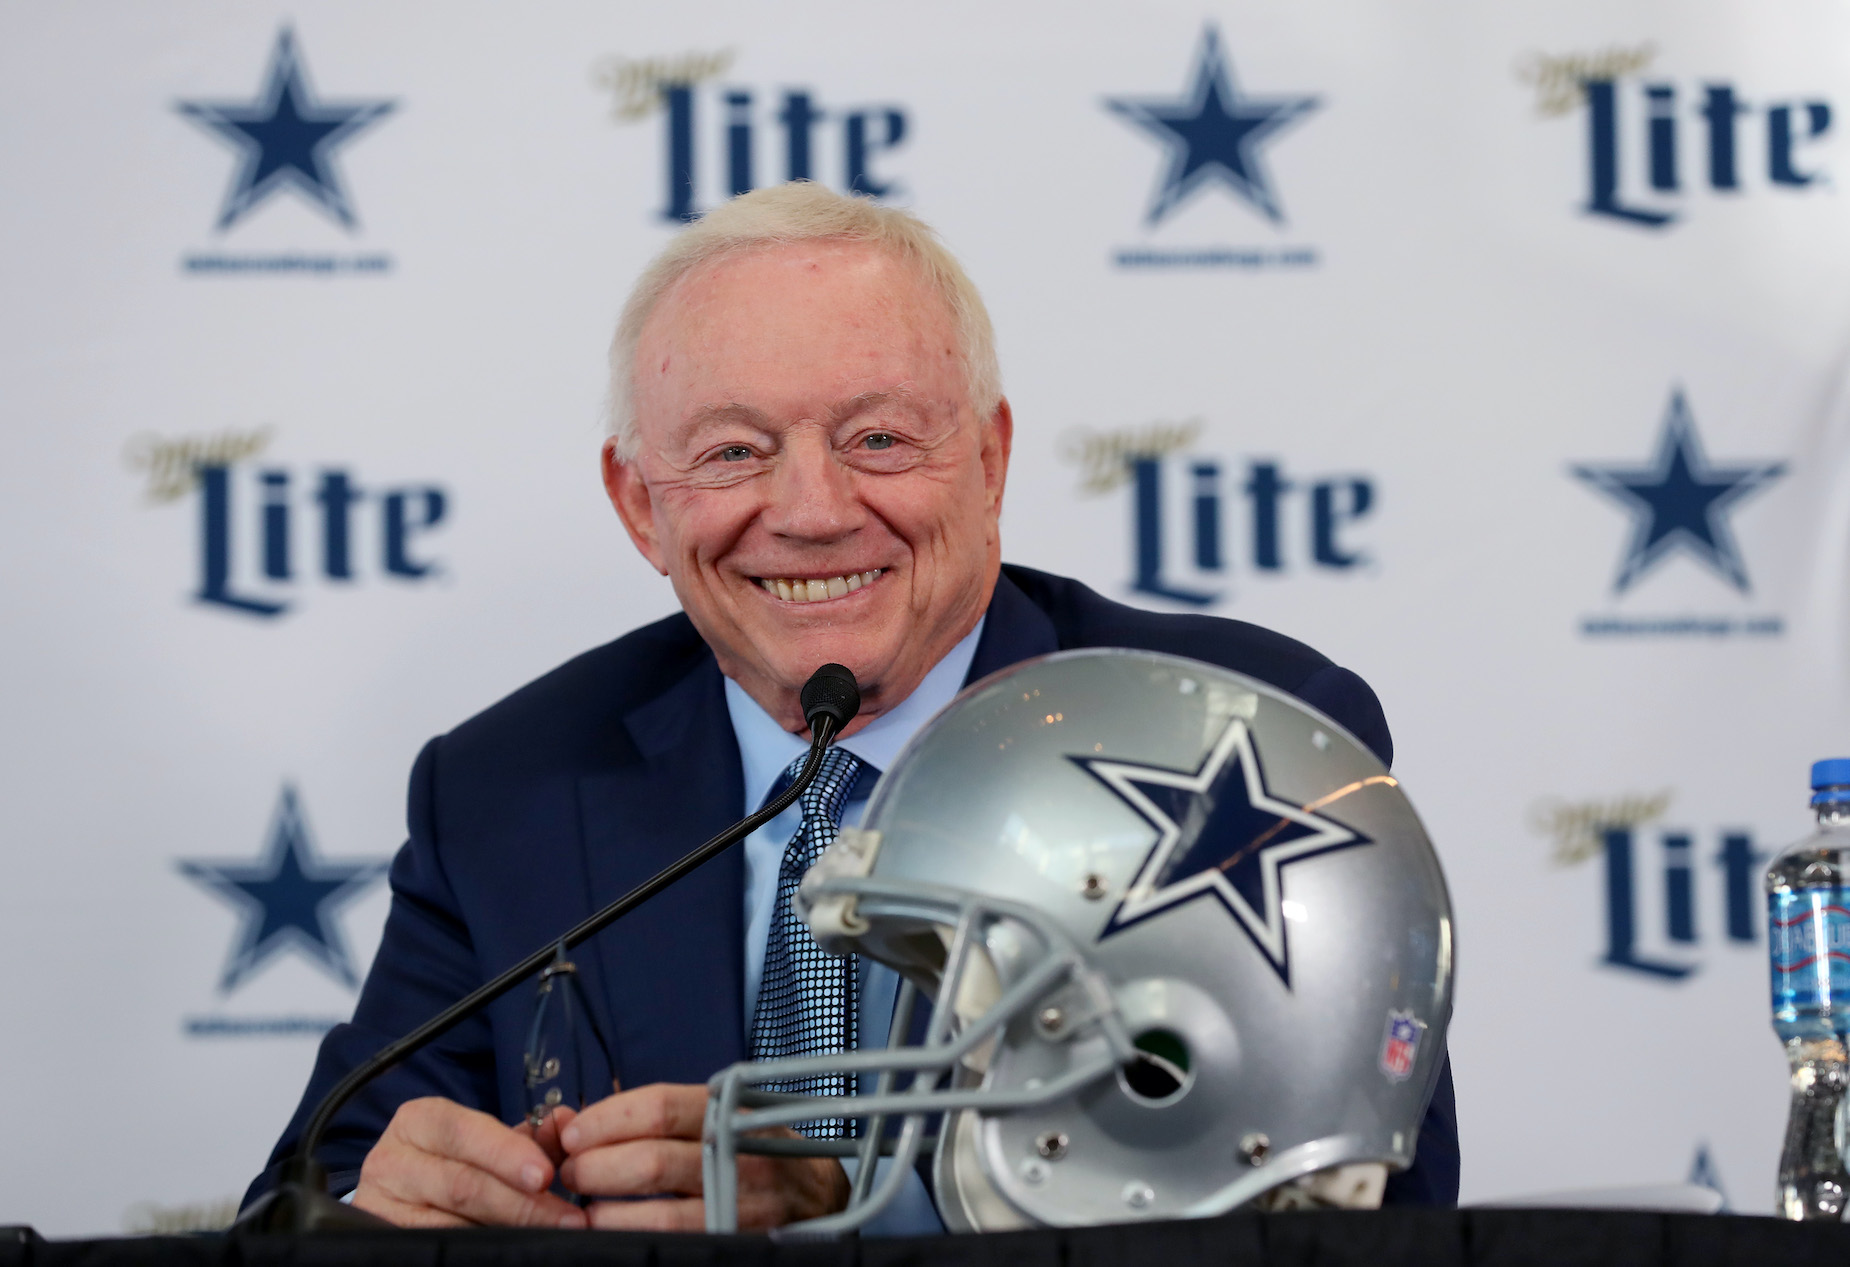 Dallas Cowboys owner Jerry Jones during a press conference.